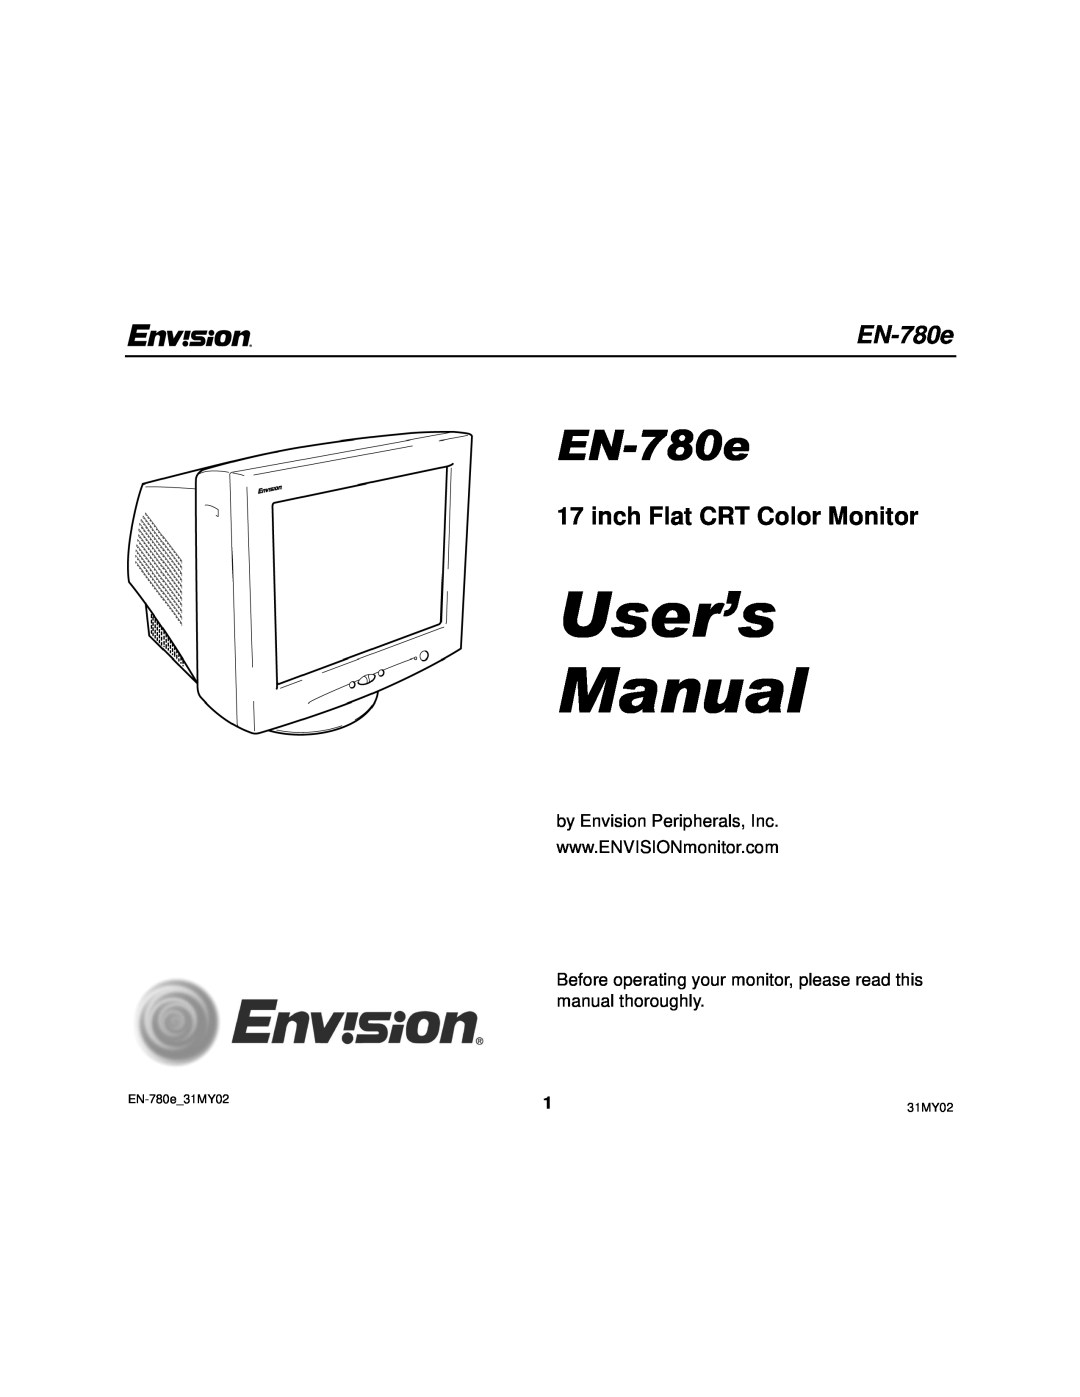 Envision Peripherals user manual inch Flat CRT Color Monitor, User’s Manual, EN-780e31MY02 